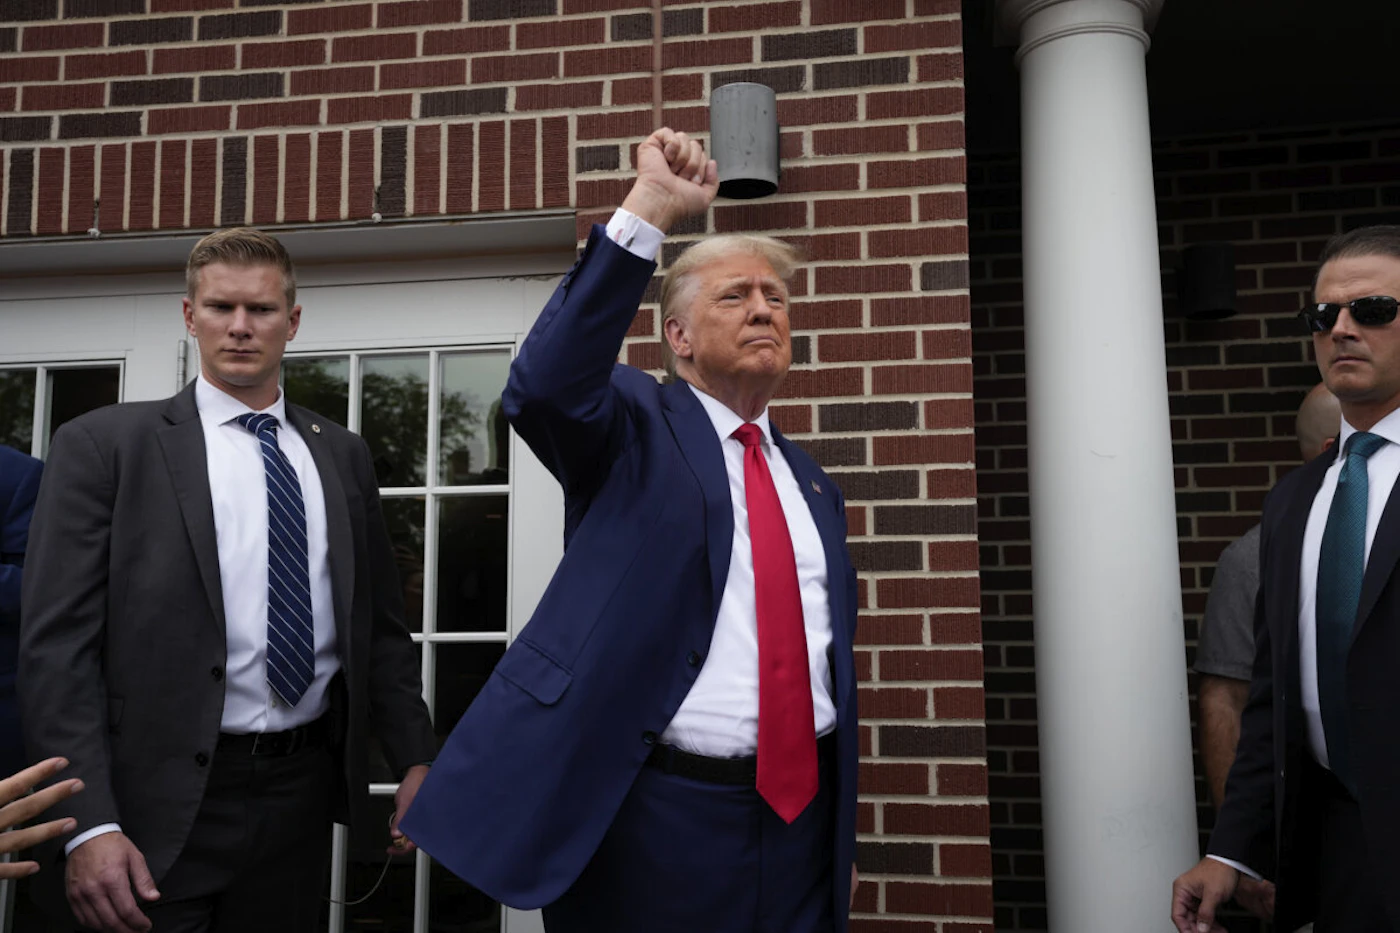 Former President Donald Trump visits the Alpha Gamma Rho, agricultural fraternity, at Iowa State University before an NCAA college football game between Iowa State and Iowa, Saturday, Sept. 9, 2023, in Ames, Iowa. (AP Photo/Charlie Neibergall)